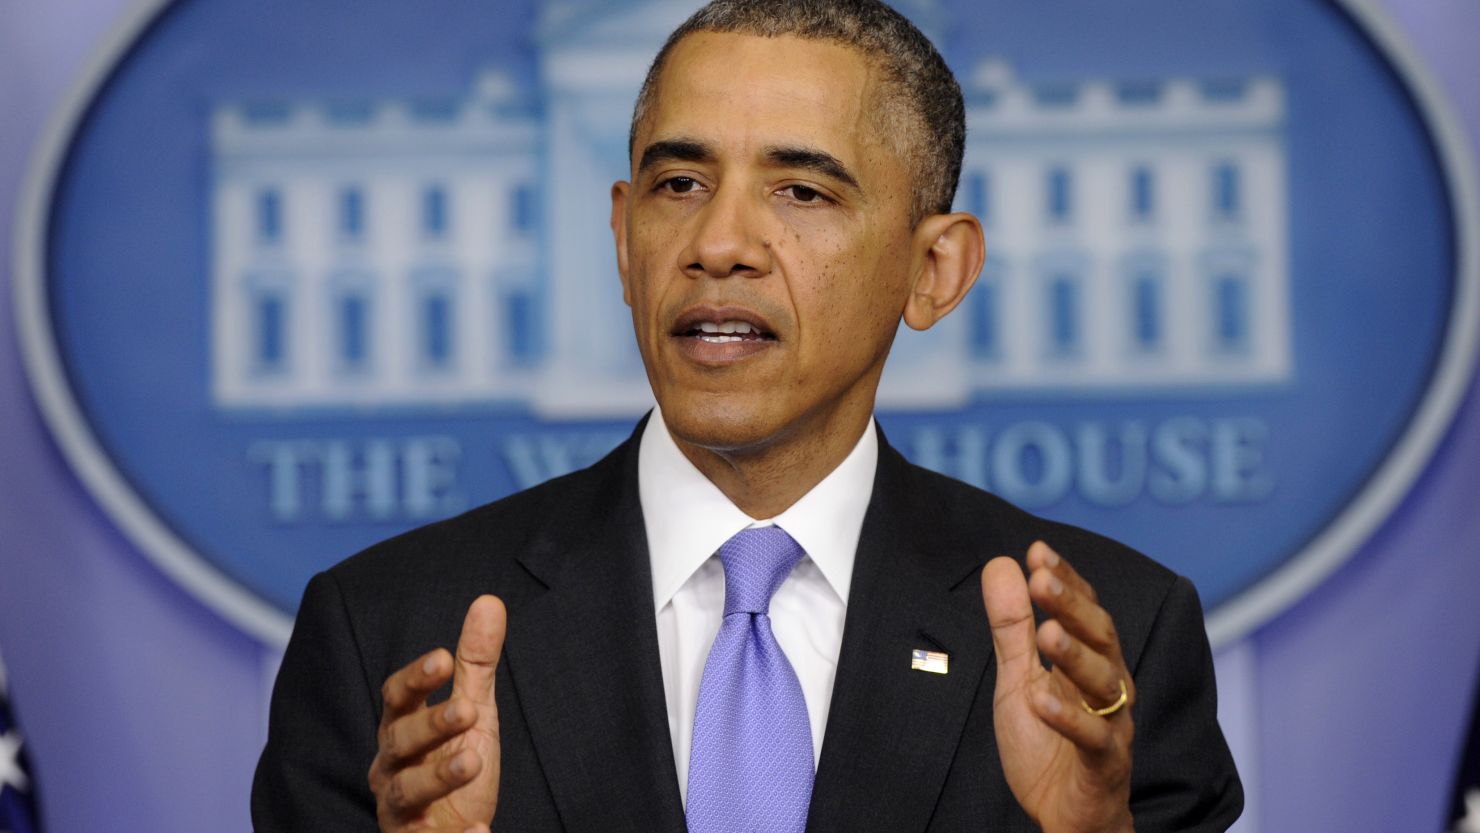 President Barack Obama held a press conference Wednesday to address the crisis at the Veterans Administration.